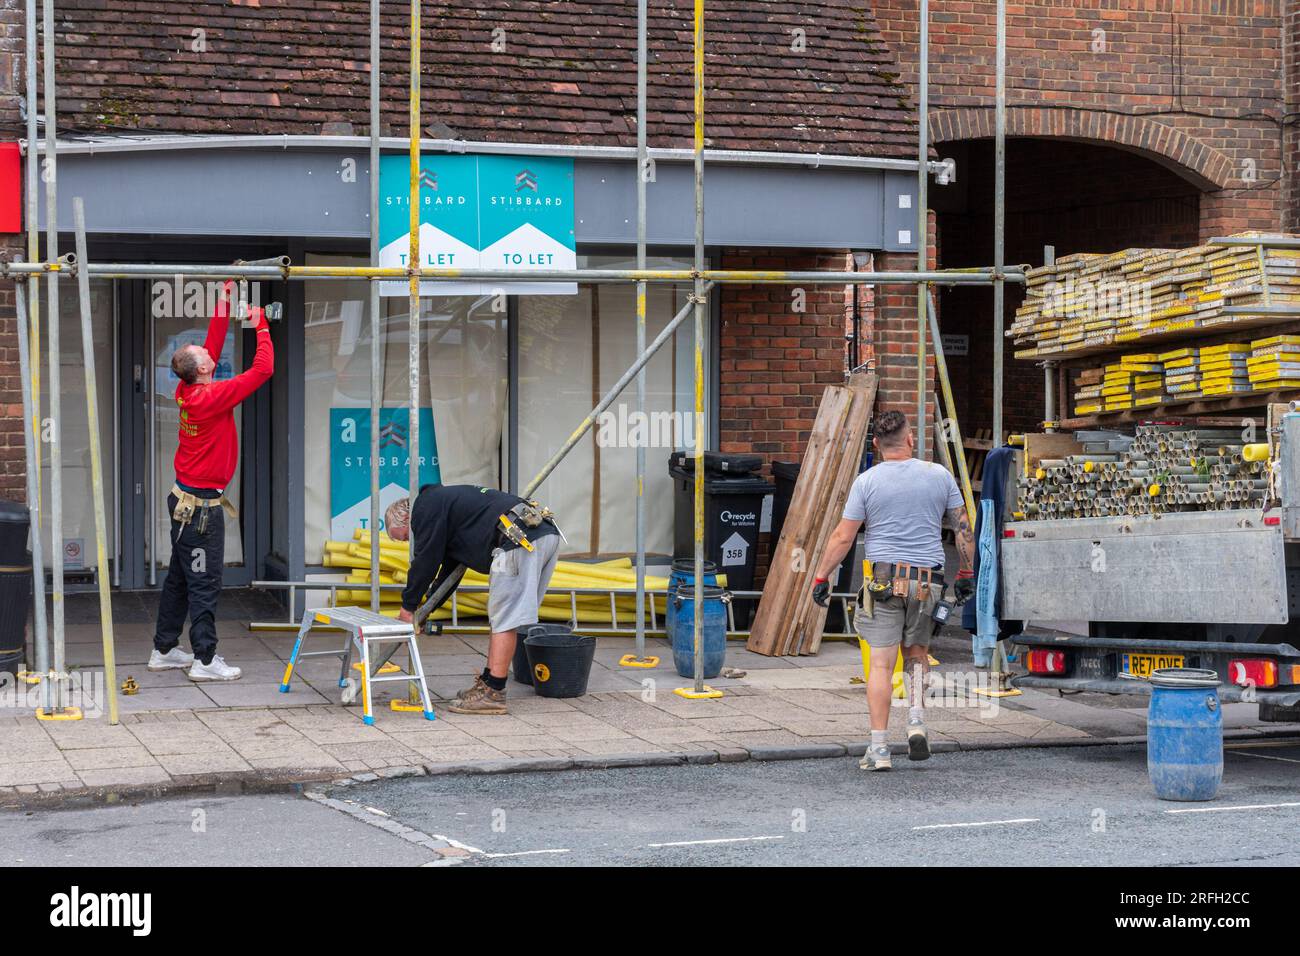 Scaffolders at work, setting up scaffolding around a building, England, UK. Job, jobs, occupation, occupations, trade, working Stock Photo